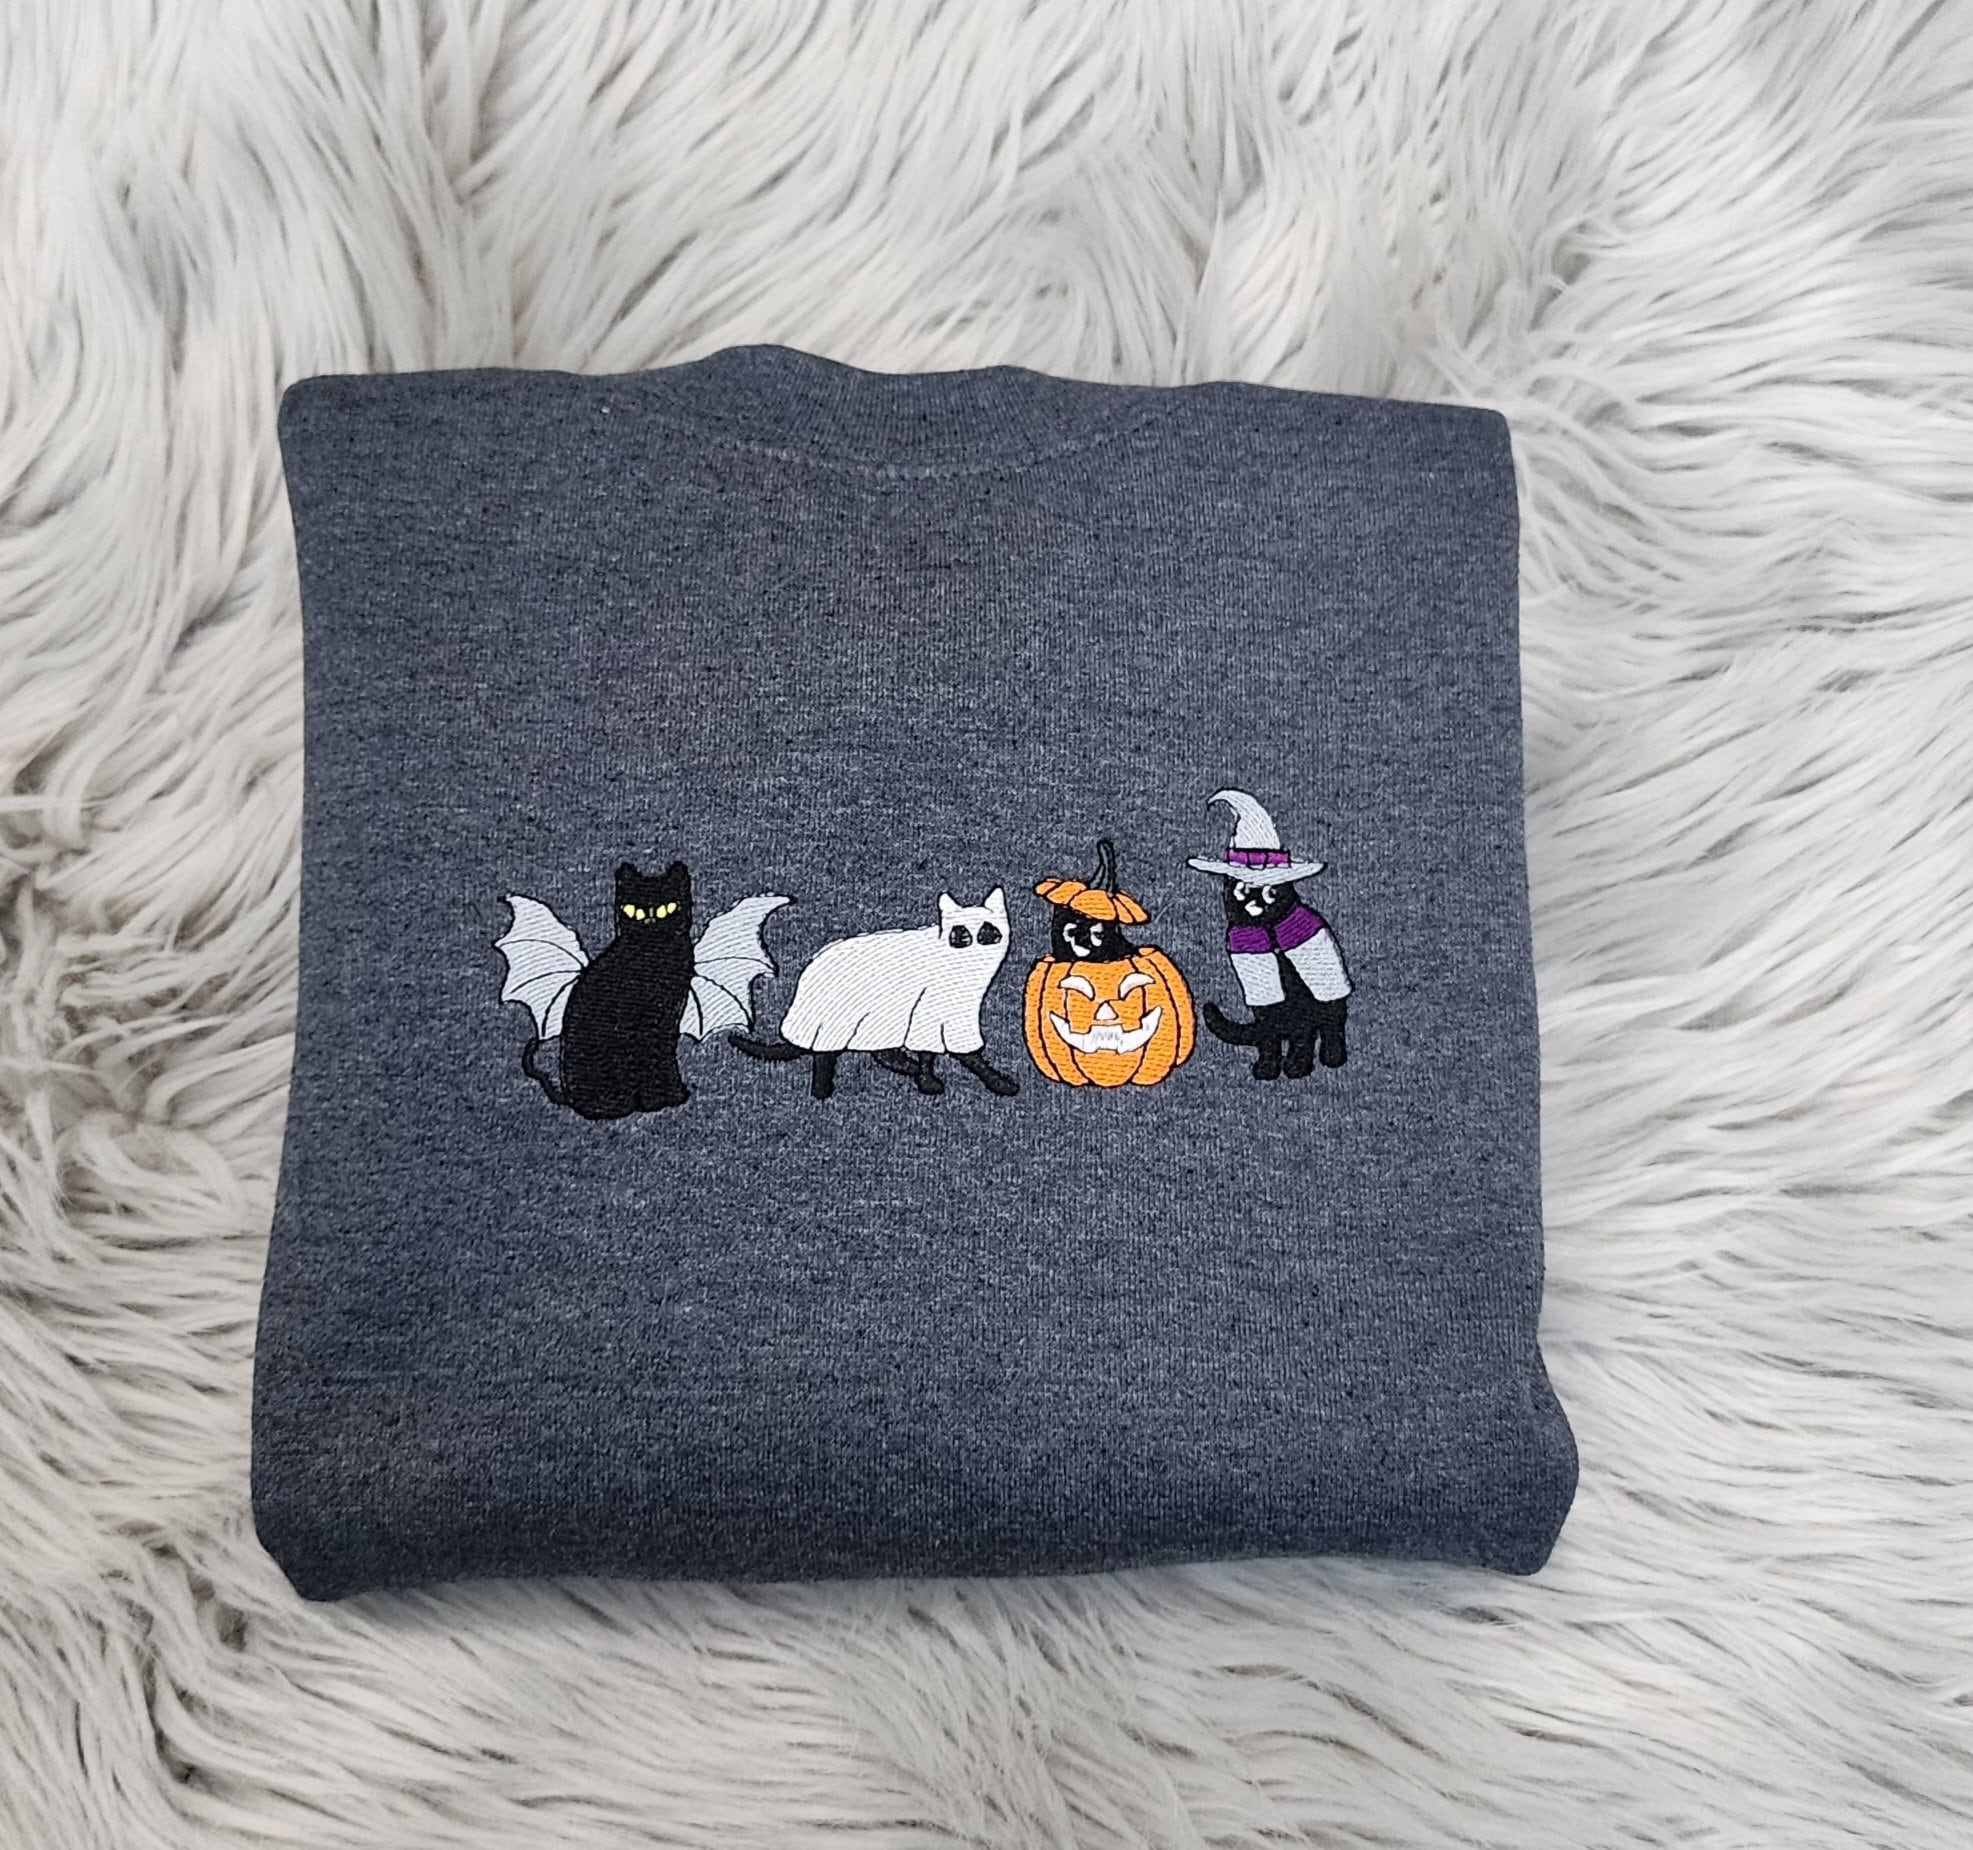 Discover Ghost Cats Halloween Embroidery Sweatshirt, Halloween Ghost Cats Embroidered Unisex Sweatshirt or Hooded Sweatshirt